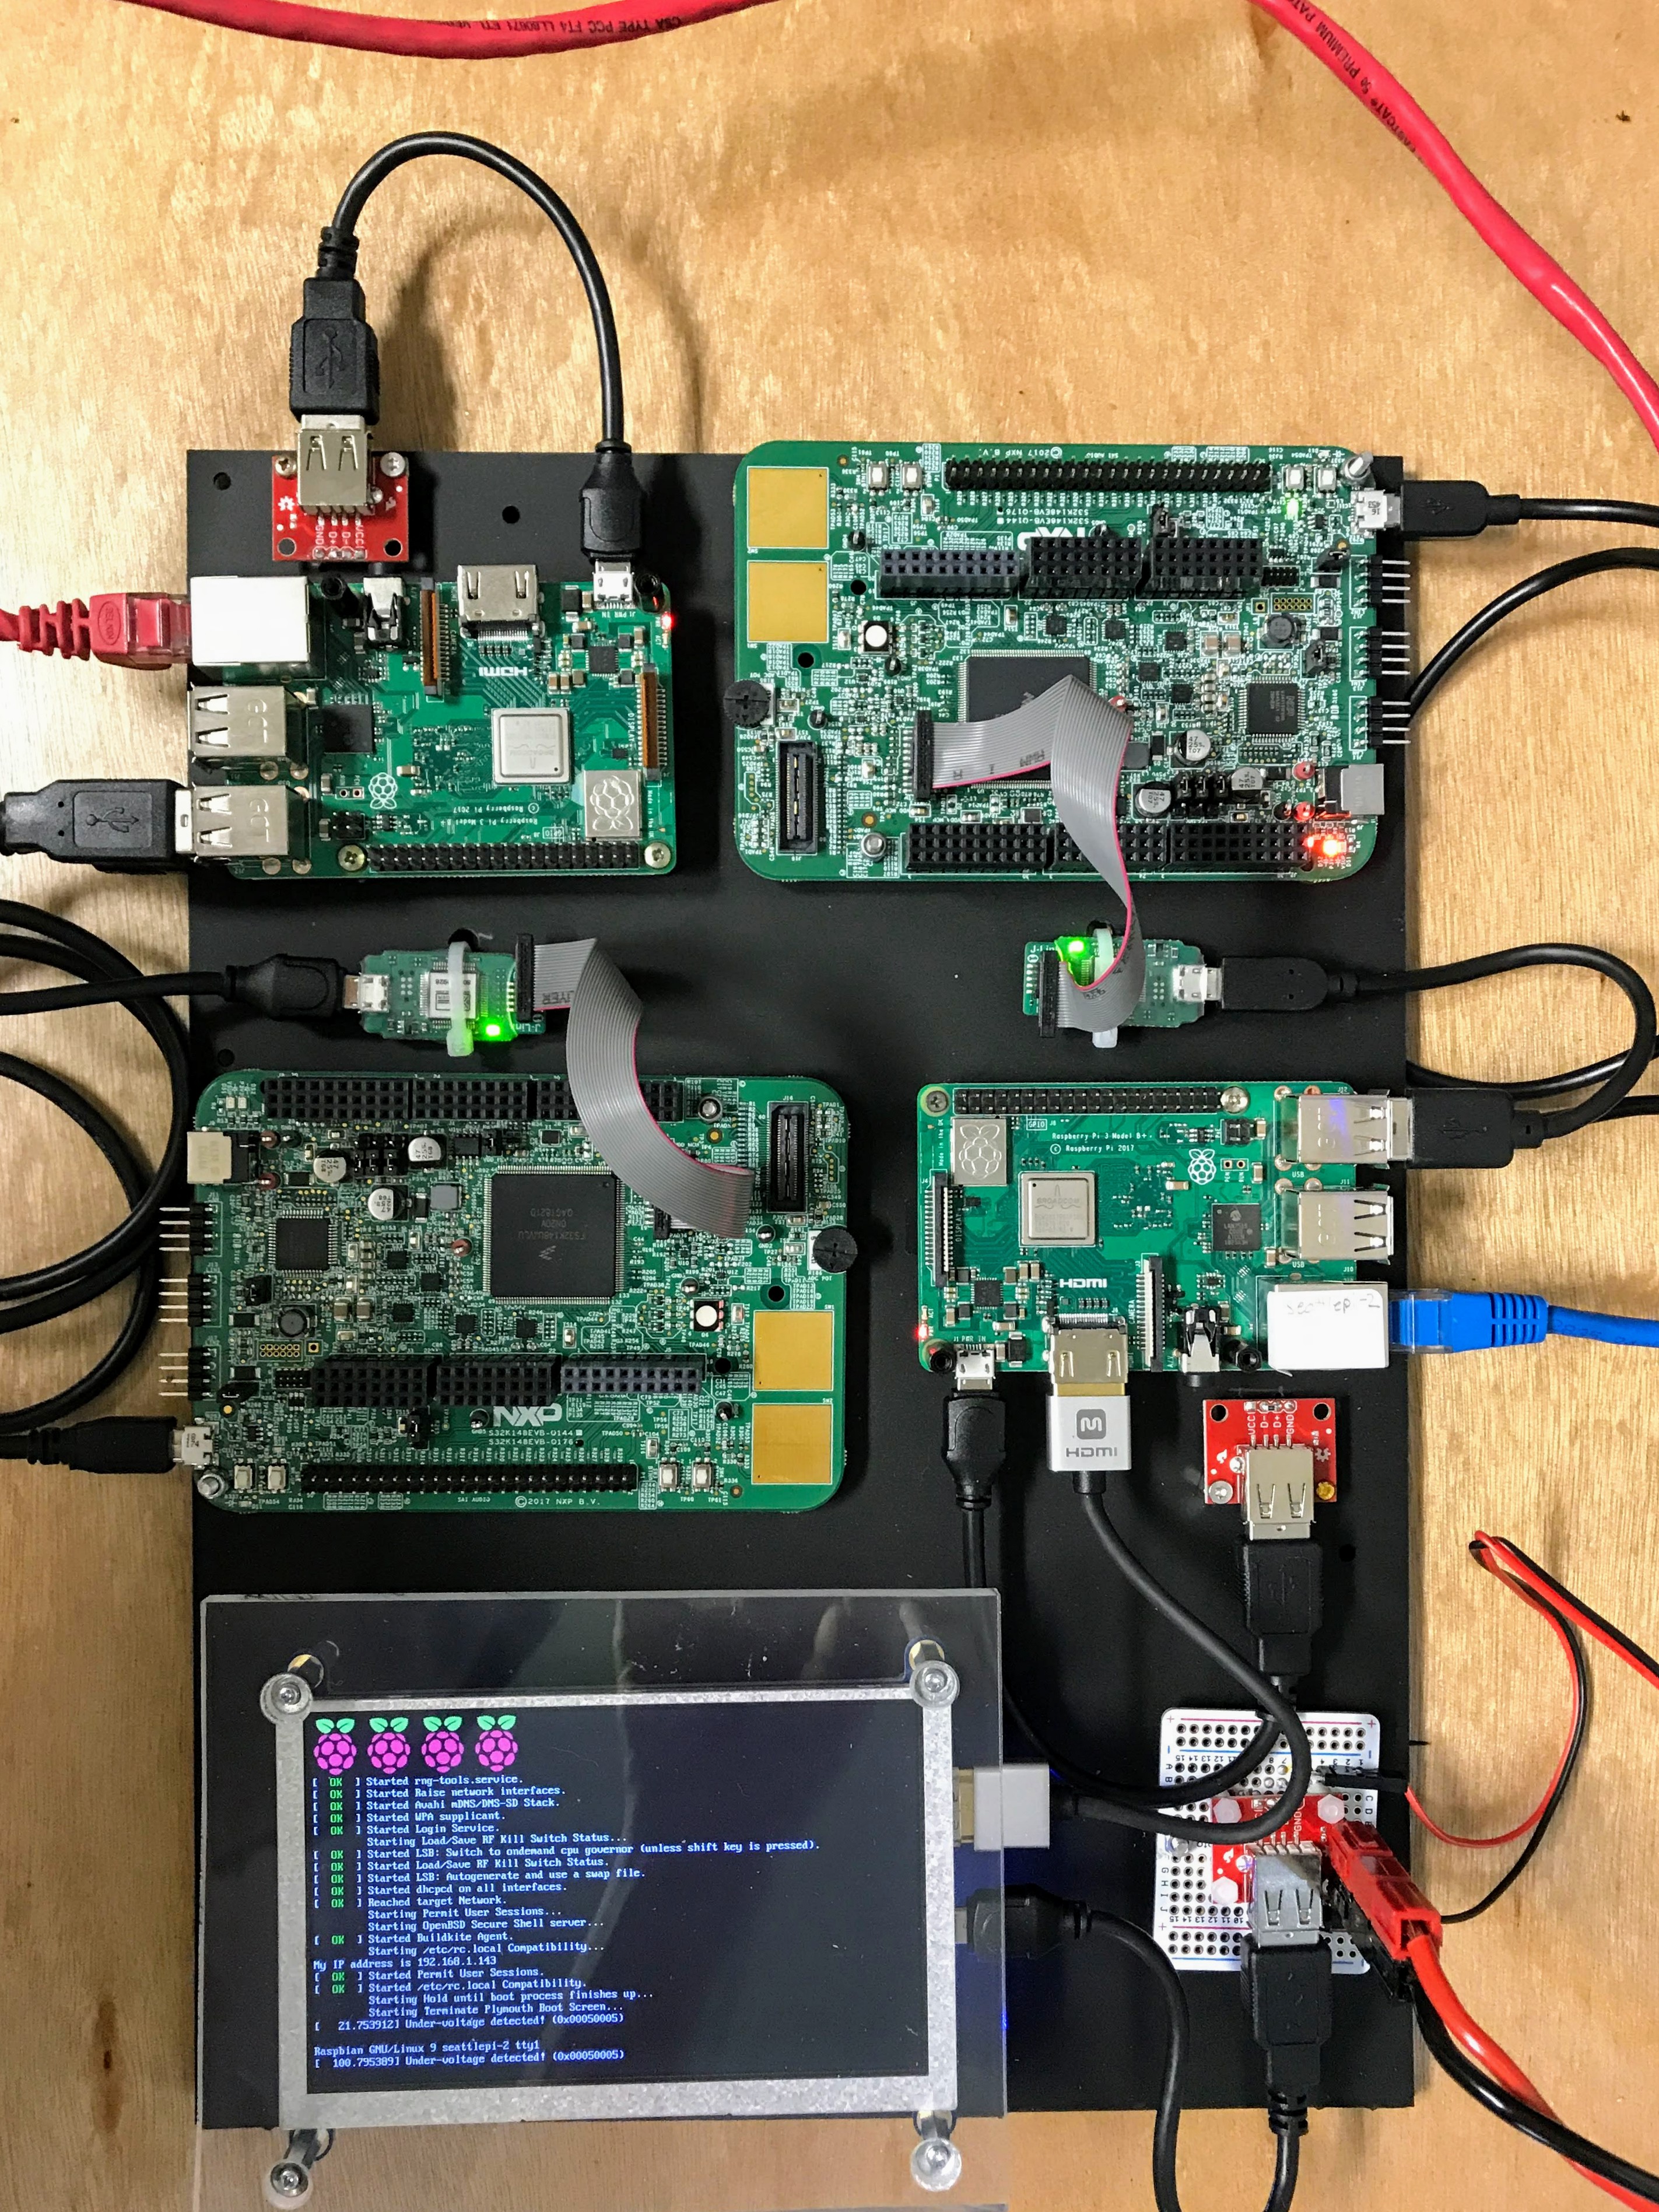 S32K evaluation boards attached to Raspberry PIs.